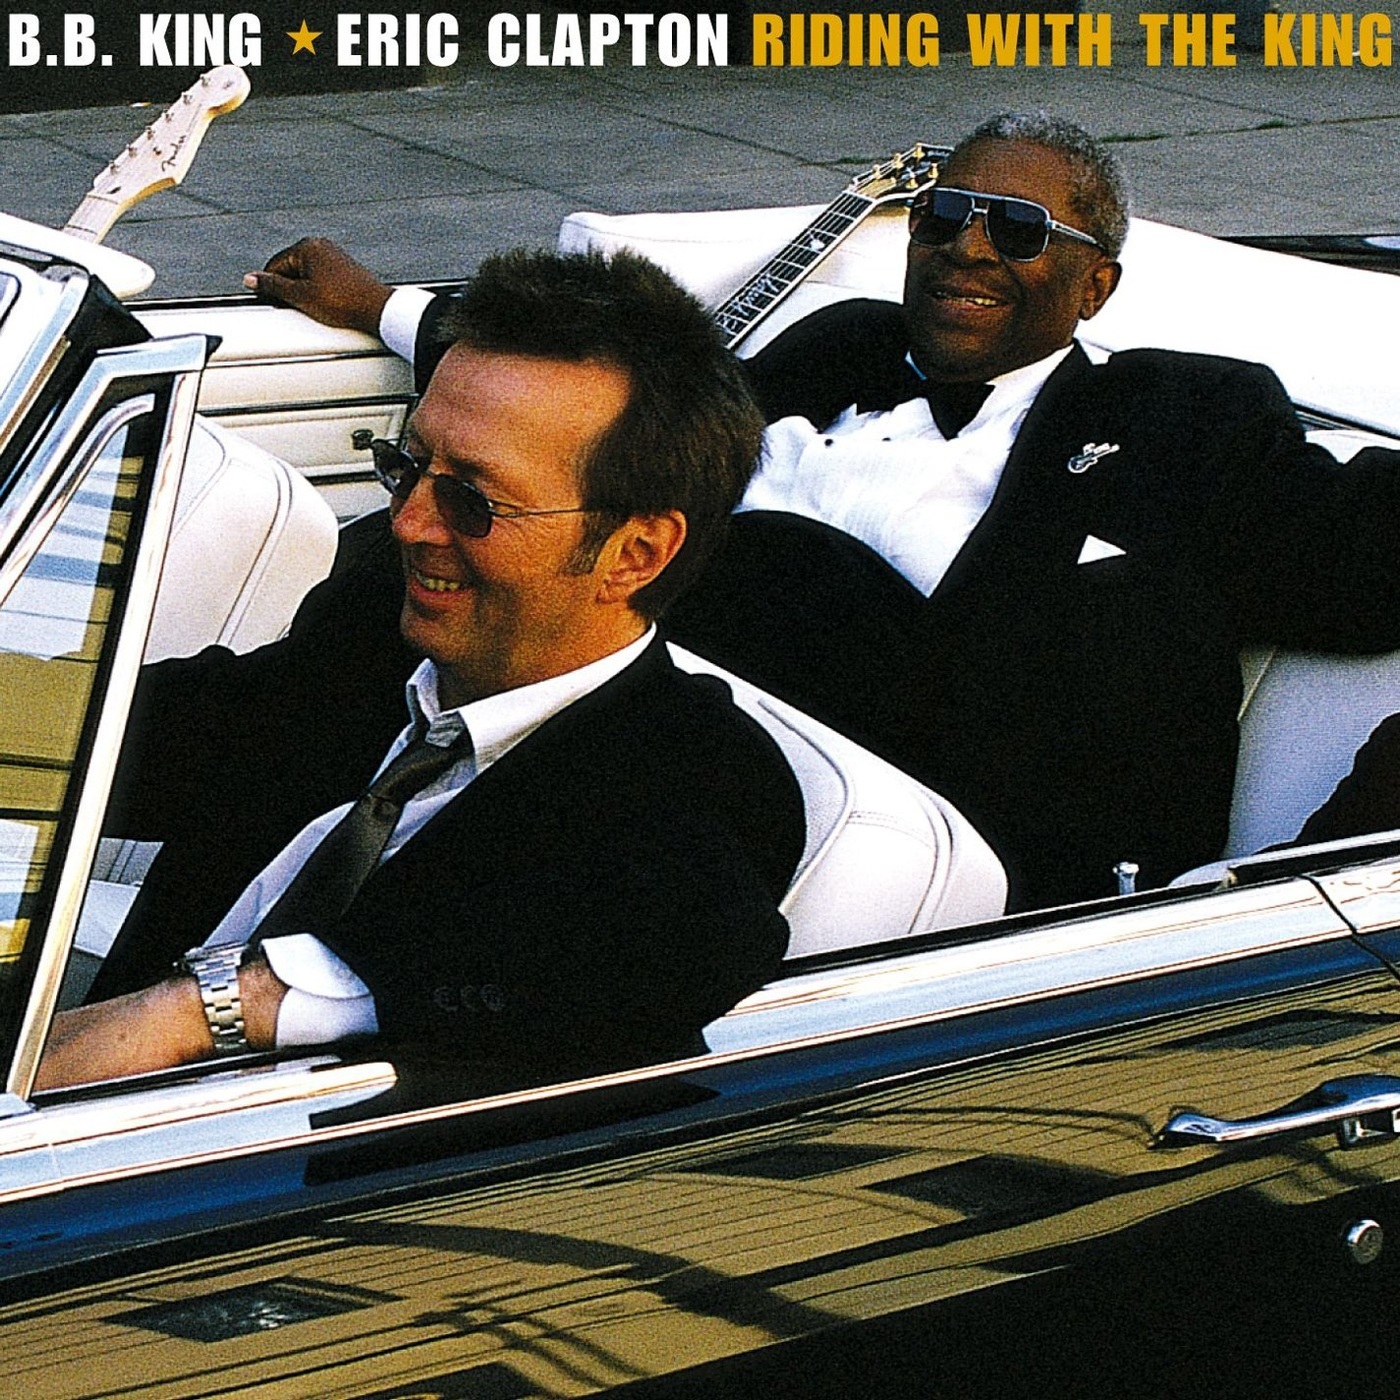 B.B. King & Eric Clapton - Riding with the King (20th Anniversary Deluxe Edition) (2000/2020) [FLAC 24bit/96kHz]